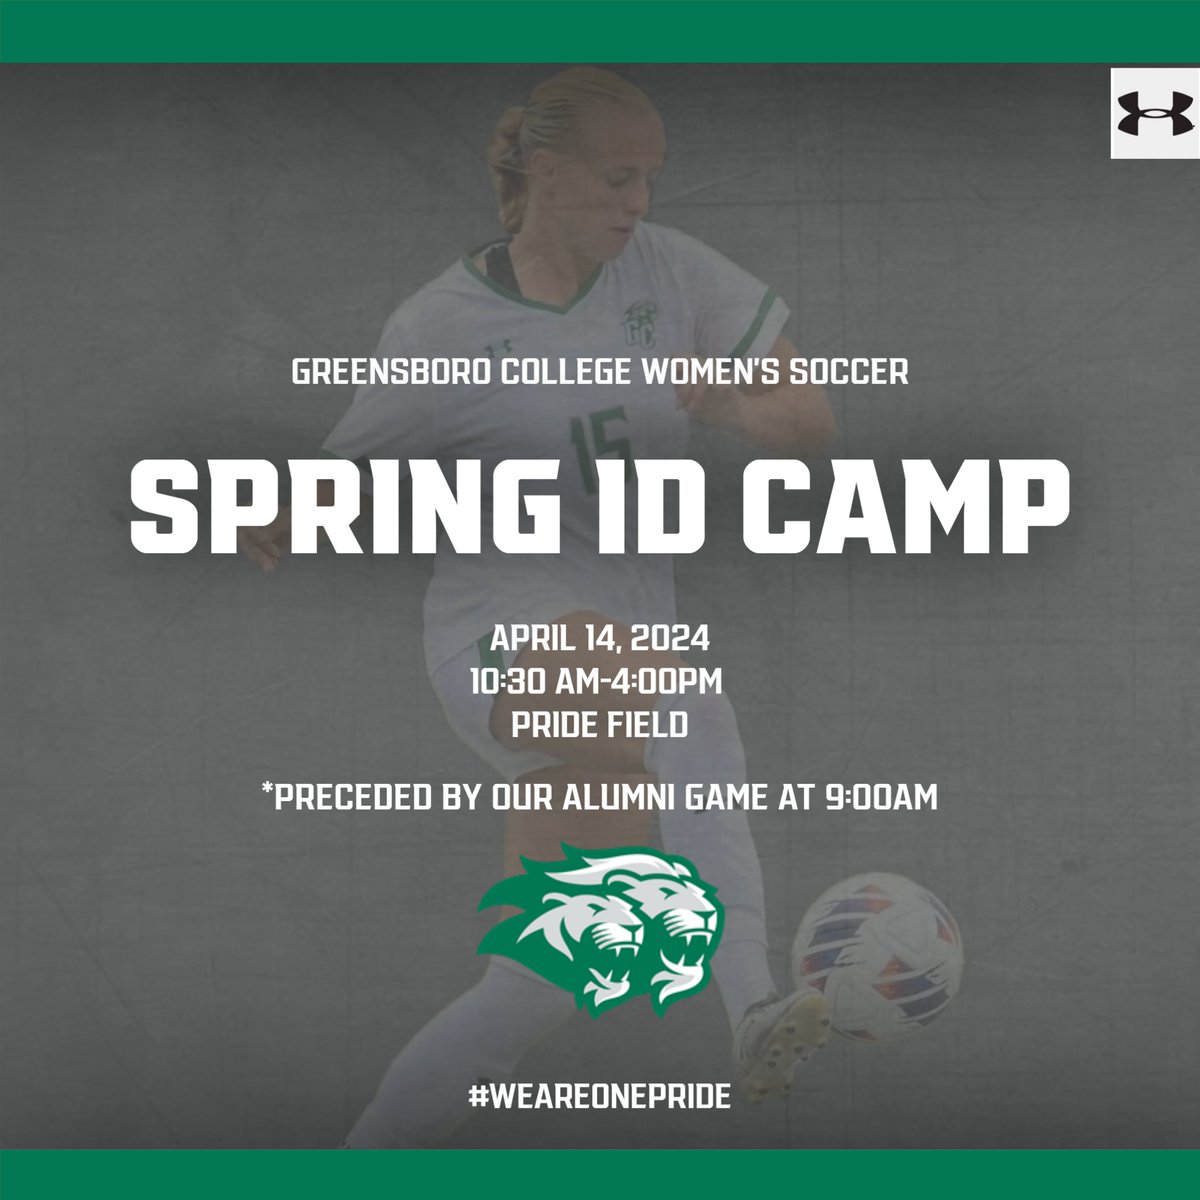 Register today for our spring ID clinic on April 14th! The clinic will be preceded by our alumni game with bragging rights on the line! Use the code 'earlybird' prior to Mar. 14th for $25 off. Register via: …llegewomenssoccercamps.totalcamps.com @GC_Pride #weareonepride